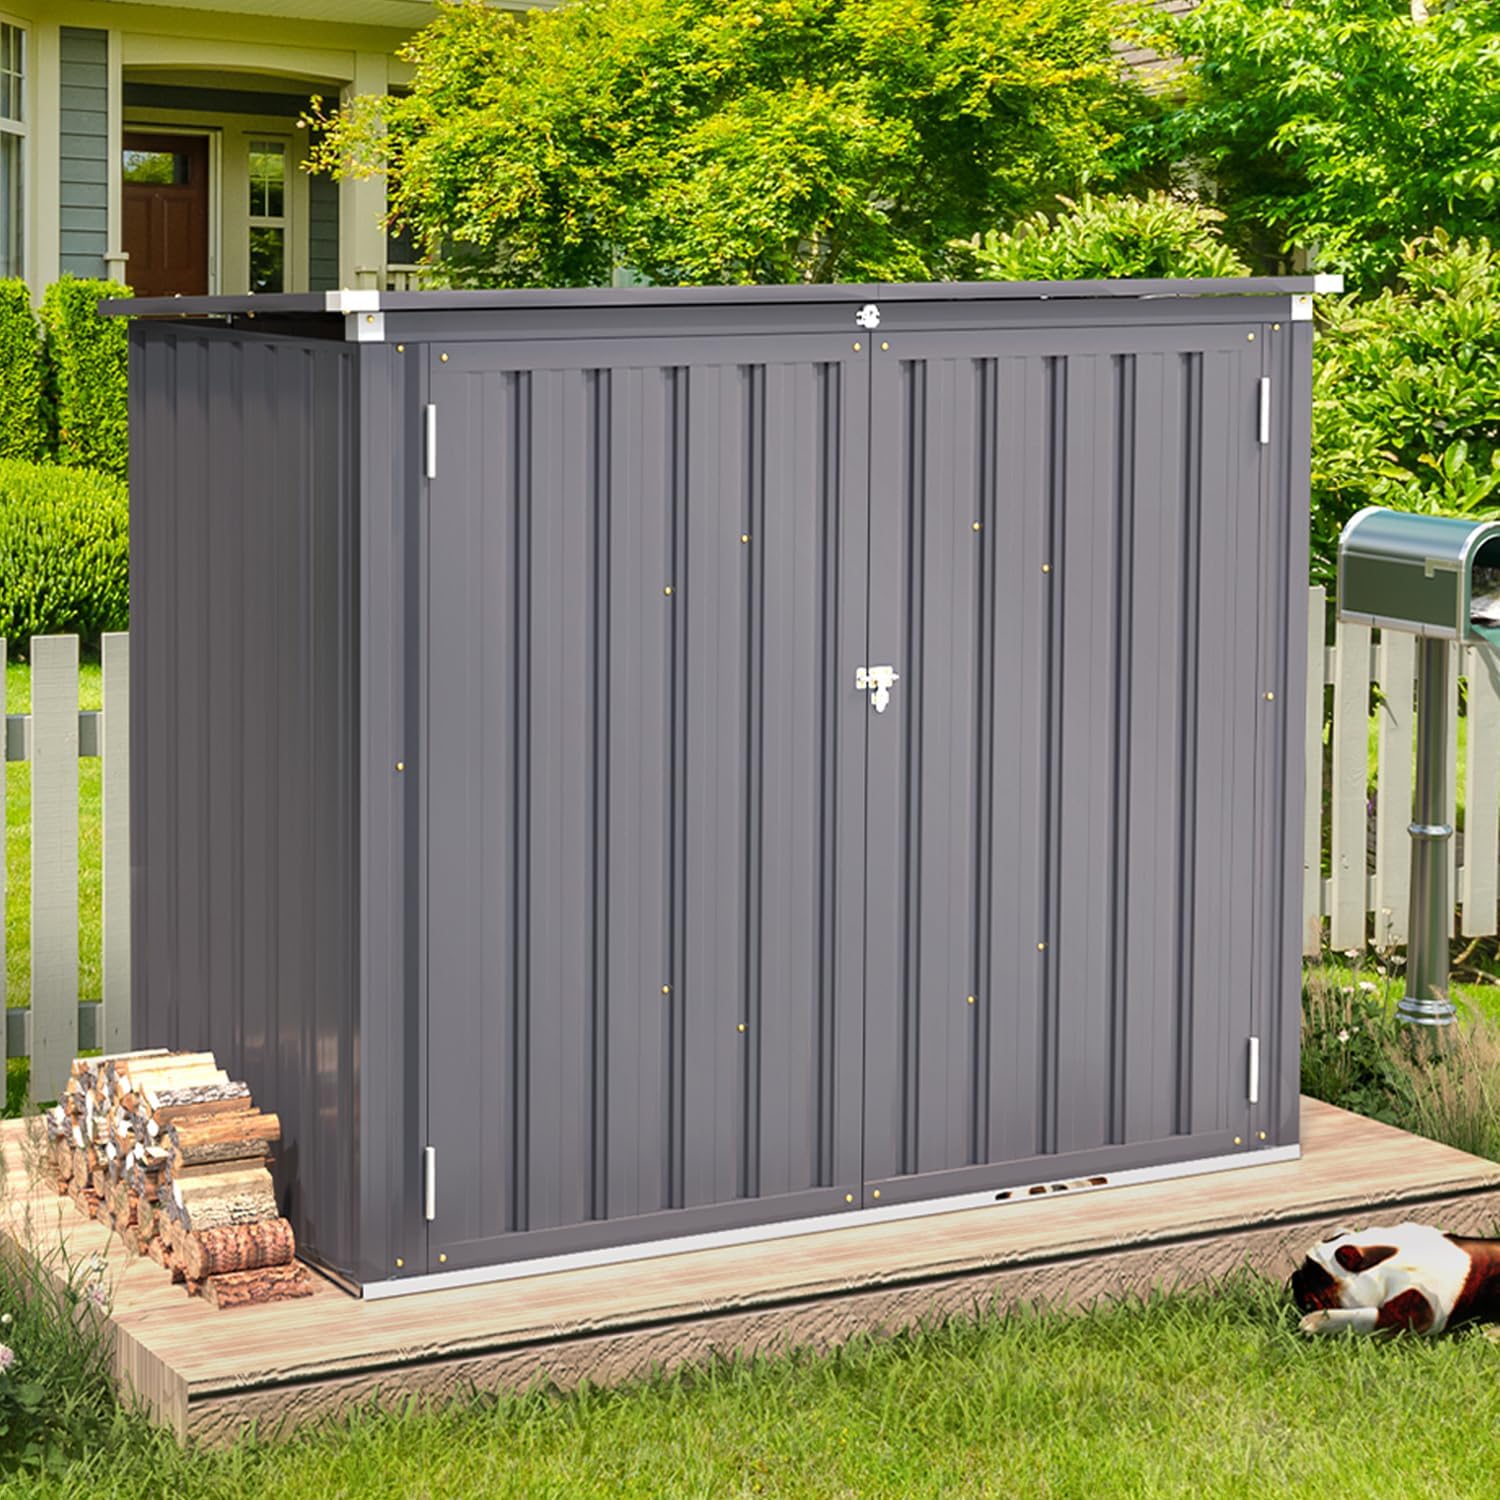 AECOJOY Outdoor Storage Box Sheds, 46 Cu. Ft Large Waterproof Outdoor Horizontal Storage Cabinet Box with Lockable Multi-Opening Door for Bikes, Trash Cans, Garden Tools in Dark Grey